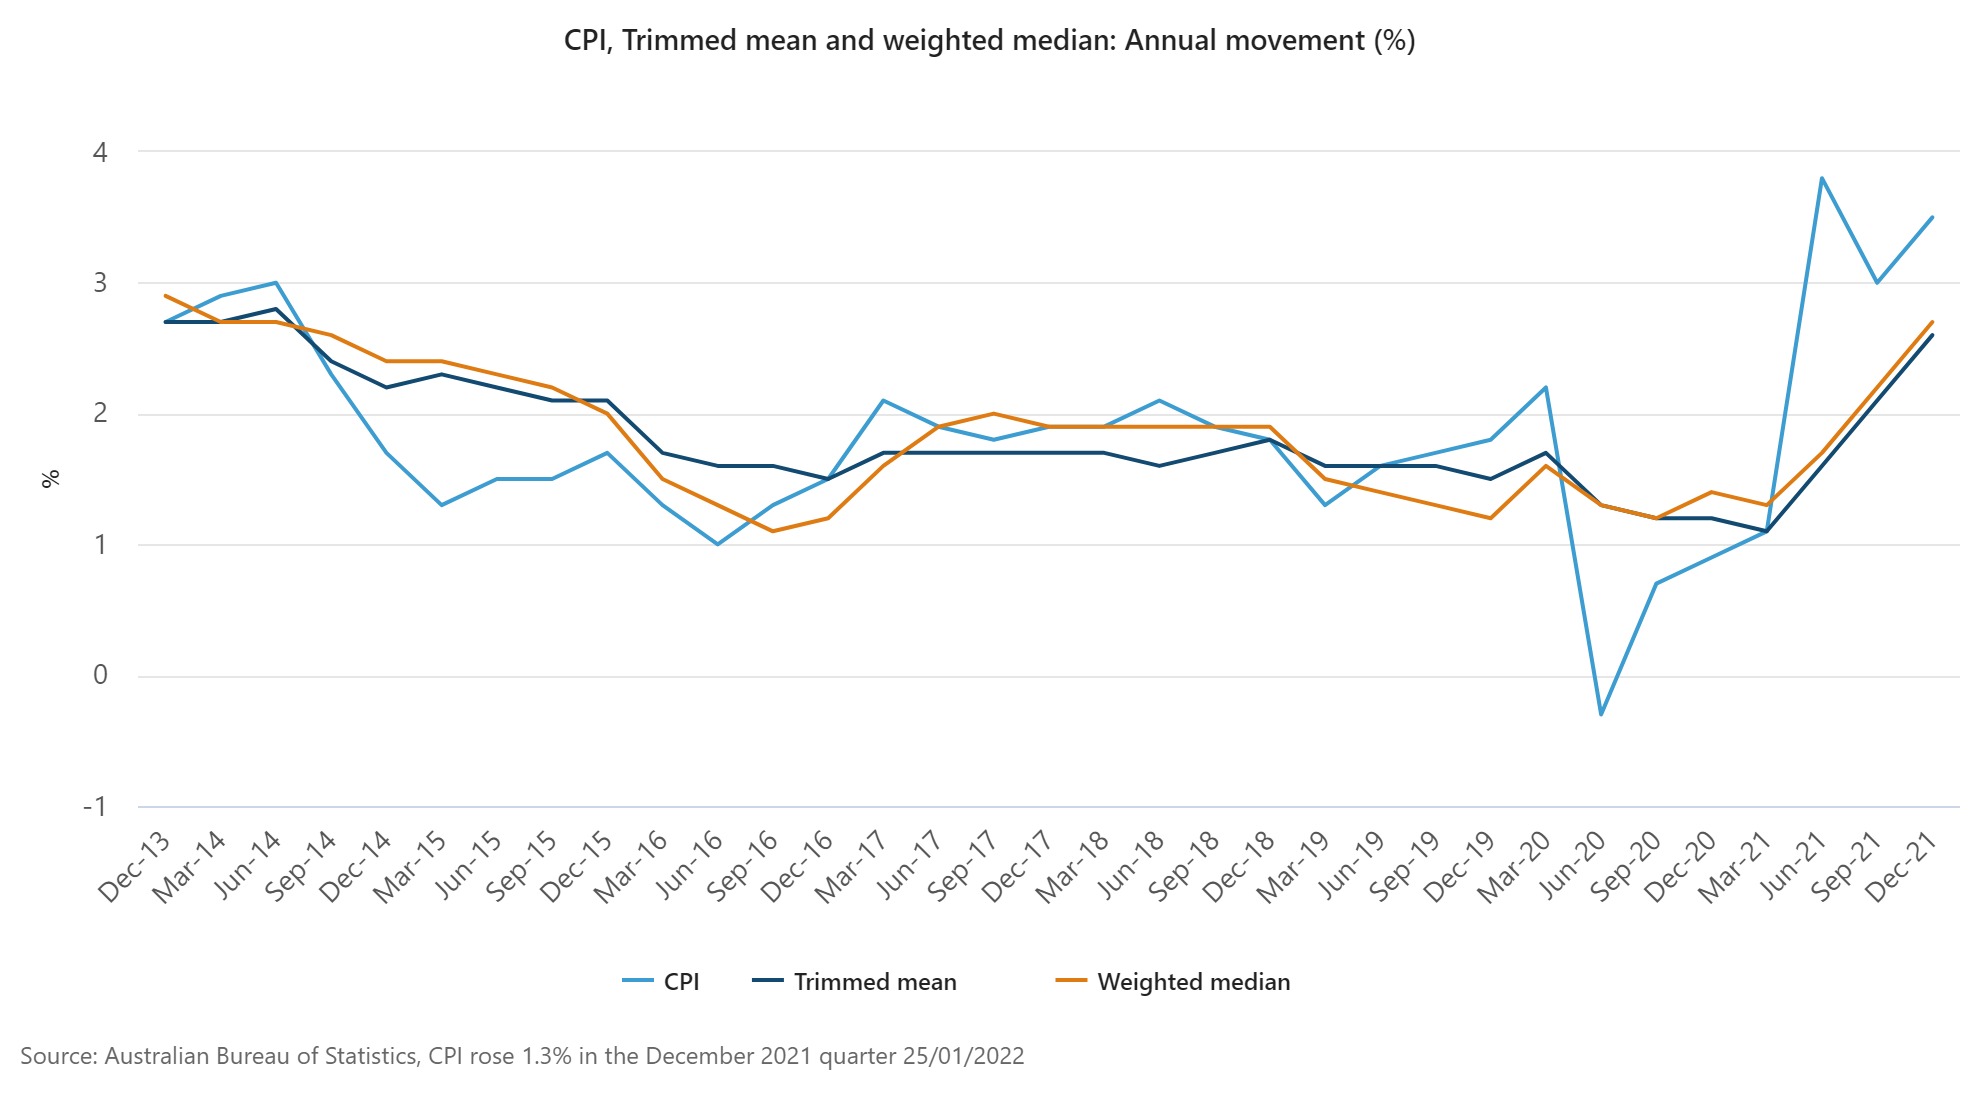 Chart comparing the headline CPI, trimmed mean and weighted median over time.